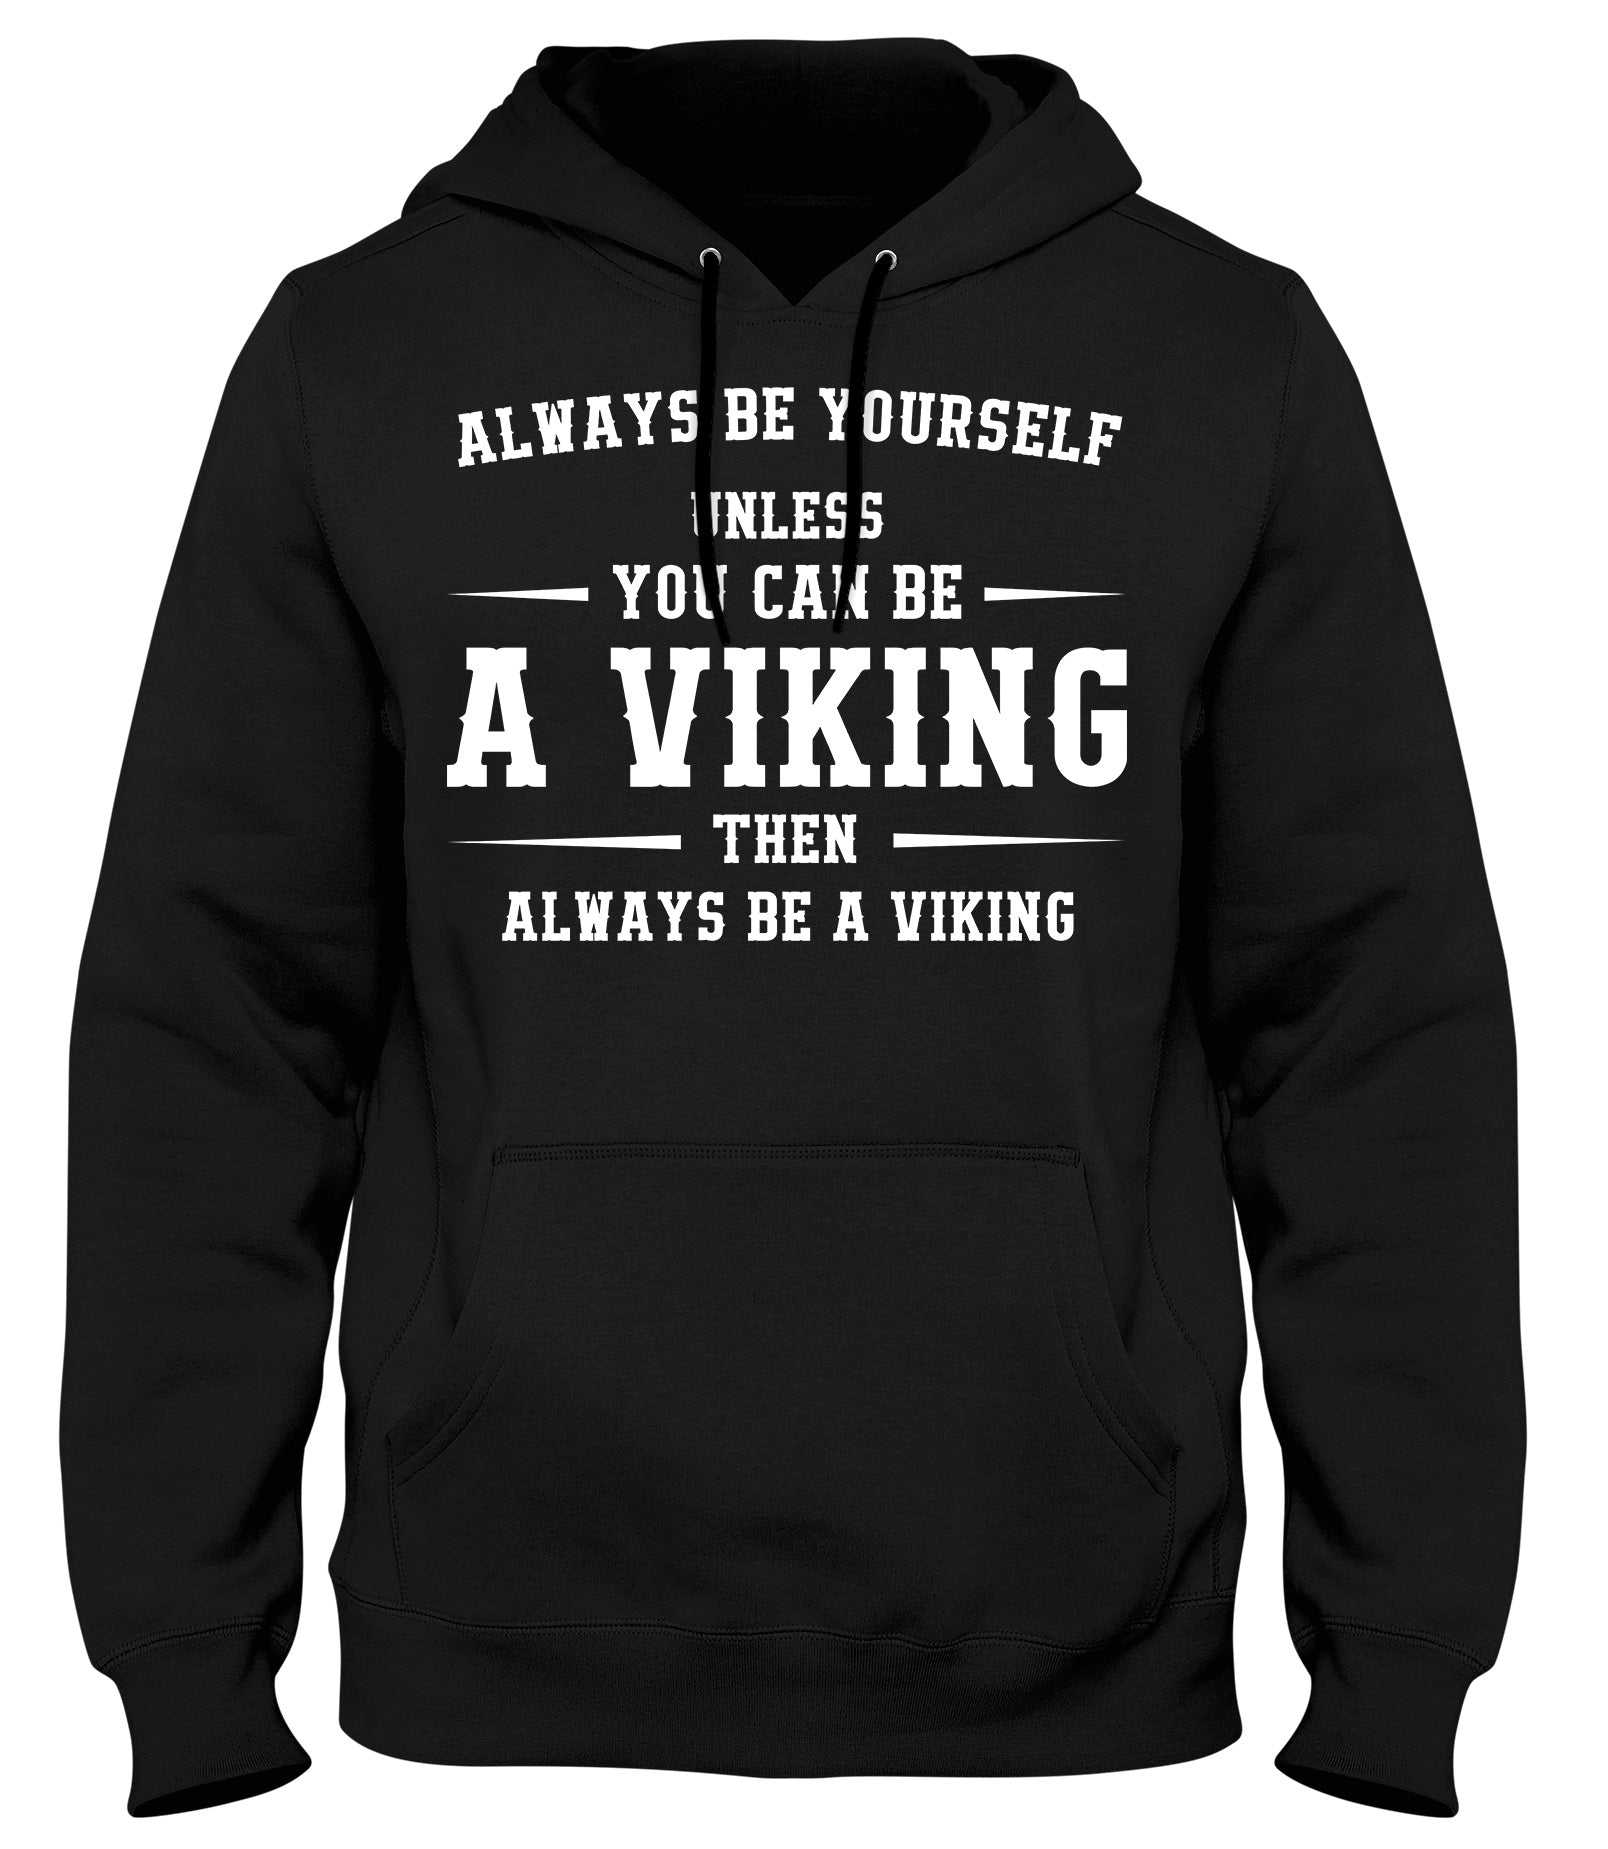 ALWAYS BE YOUSELF UNLESS YOU CAN BE A VIKING THEN ALWAYS BE A VIKING MENS WOMENS LADIES UNISEX FUNNY SLOGAN HOODIE